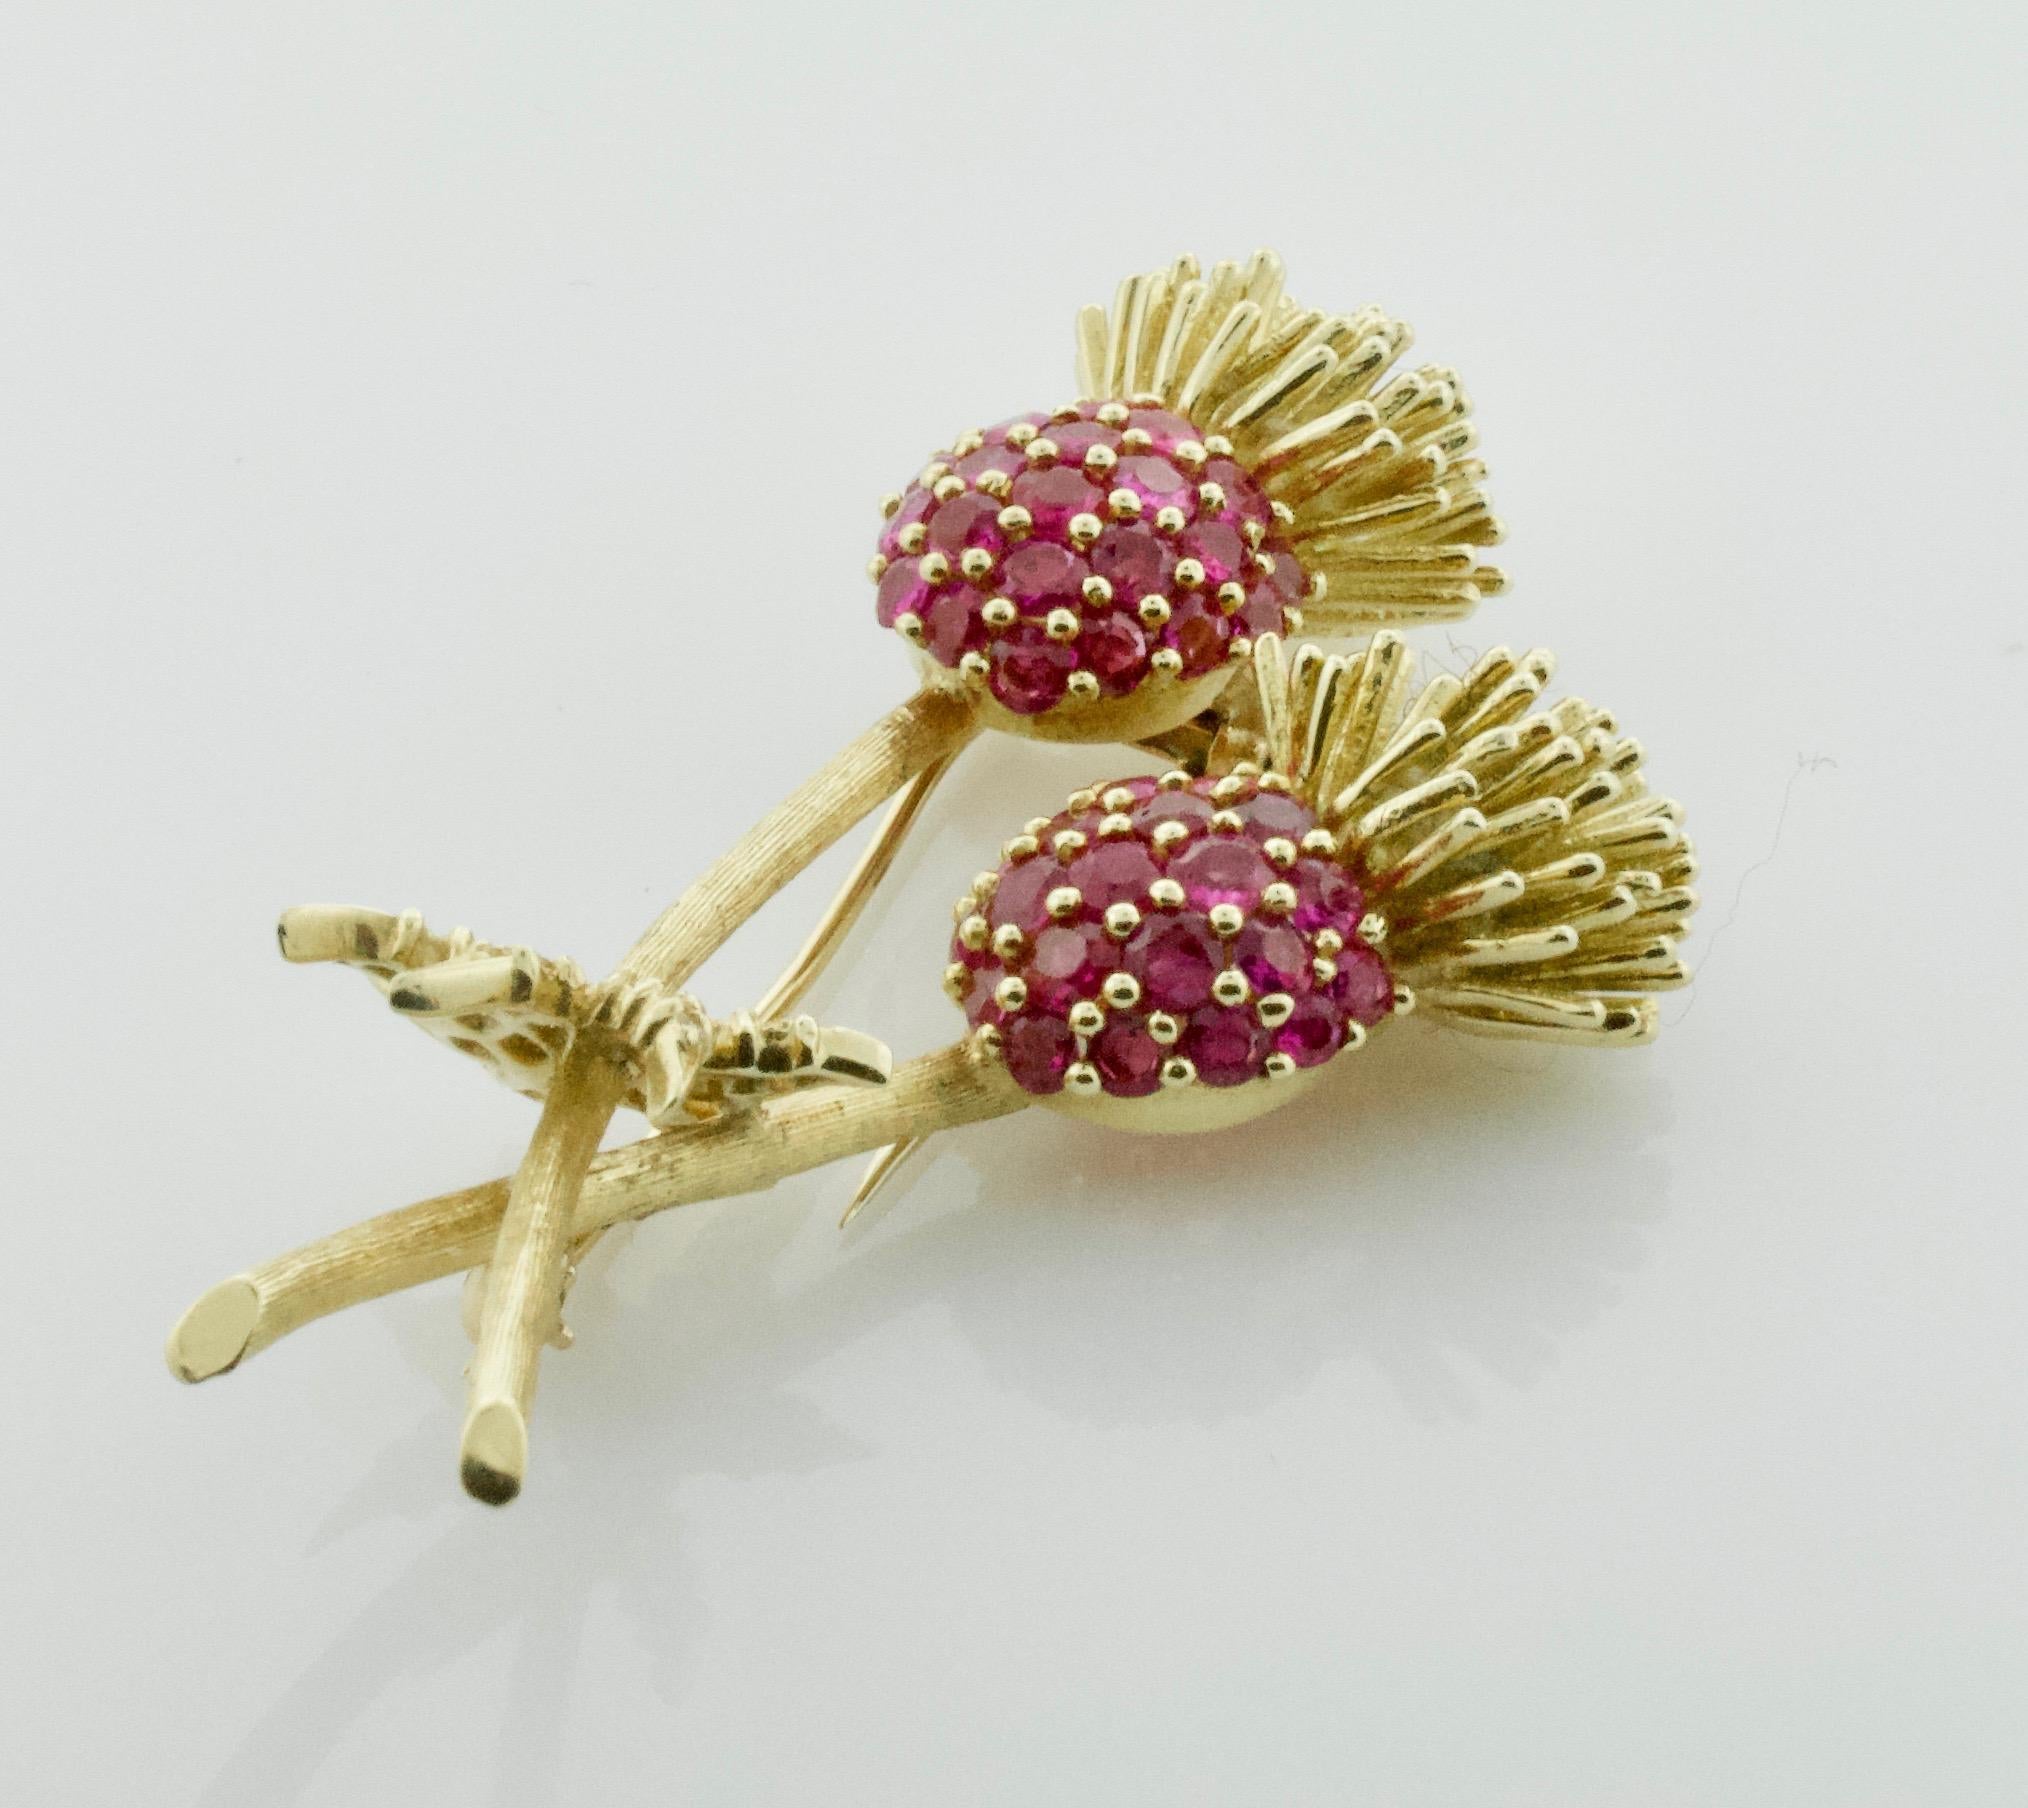 Ruby and Diamond Brooch Circa 1940's 18k  2.50 carats of Rubies
Forty Six Round Rubies weighing 2.50 carats approximately [bright with no imperfections visible to the naked eye] Burma Color
Twenty Two Round Brilliant Cut Diamonds weighing .45 carats